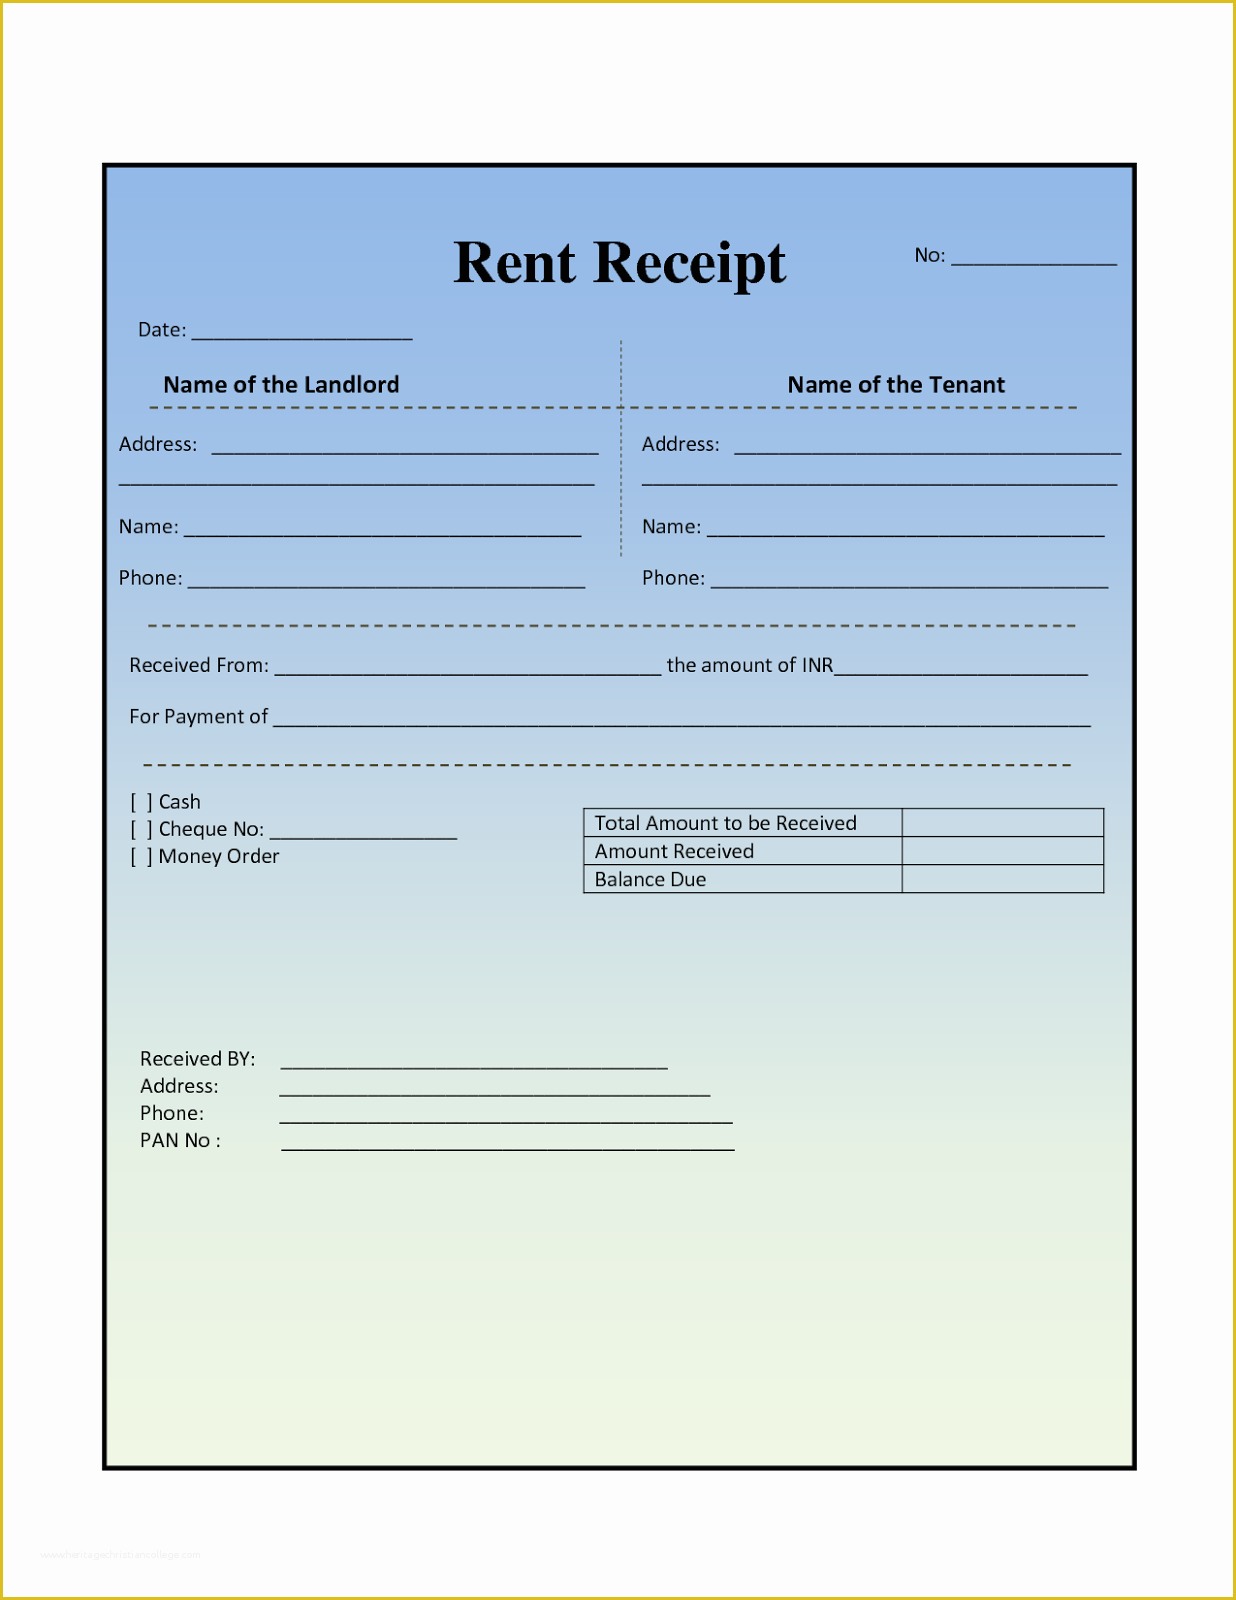 Free Rent Receipt Template Excel Of House Rental Invoice Template In Excel format Rent